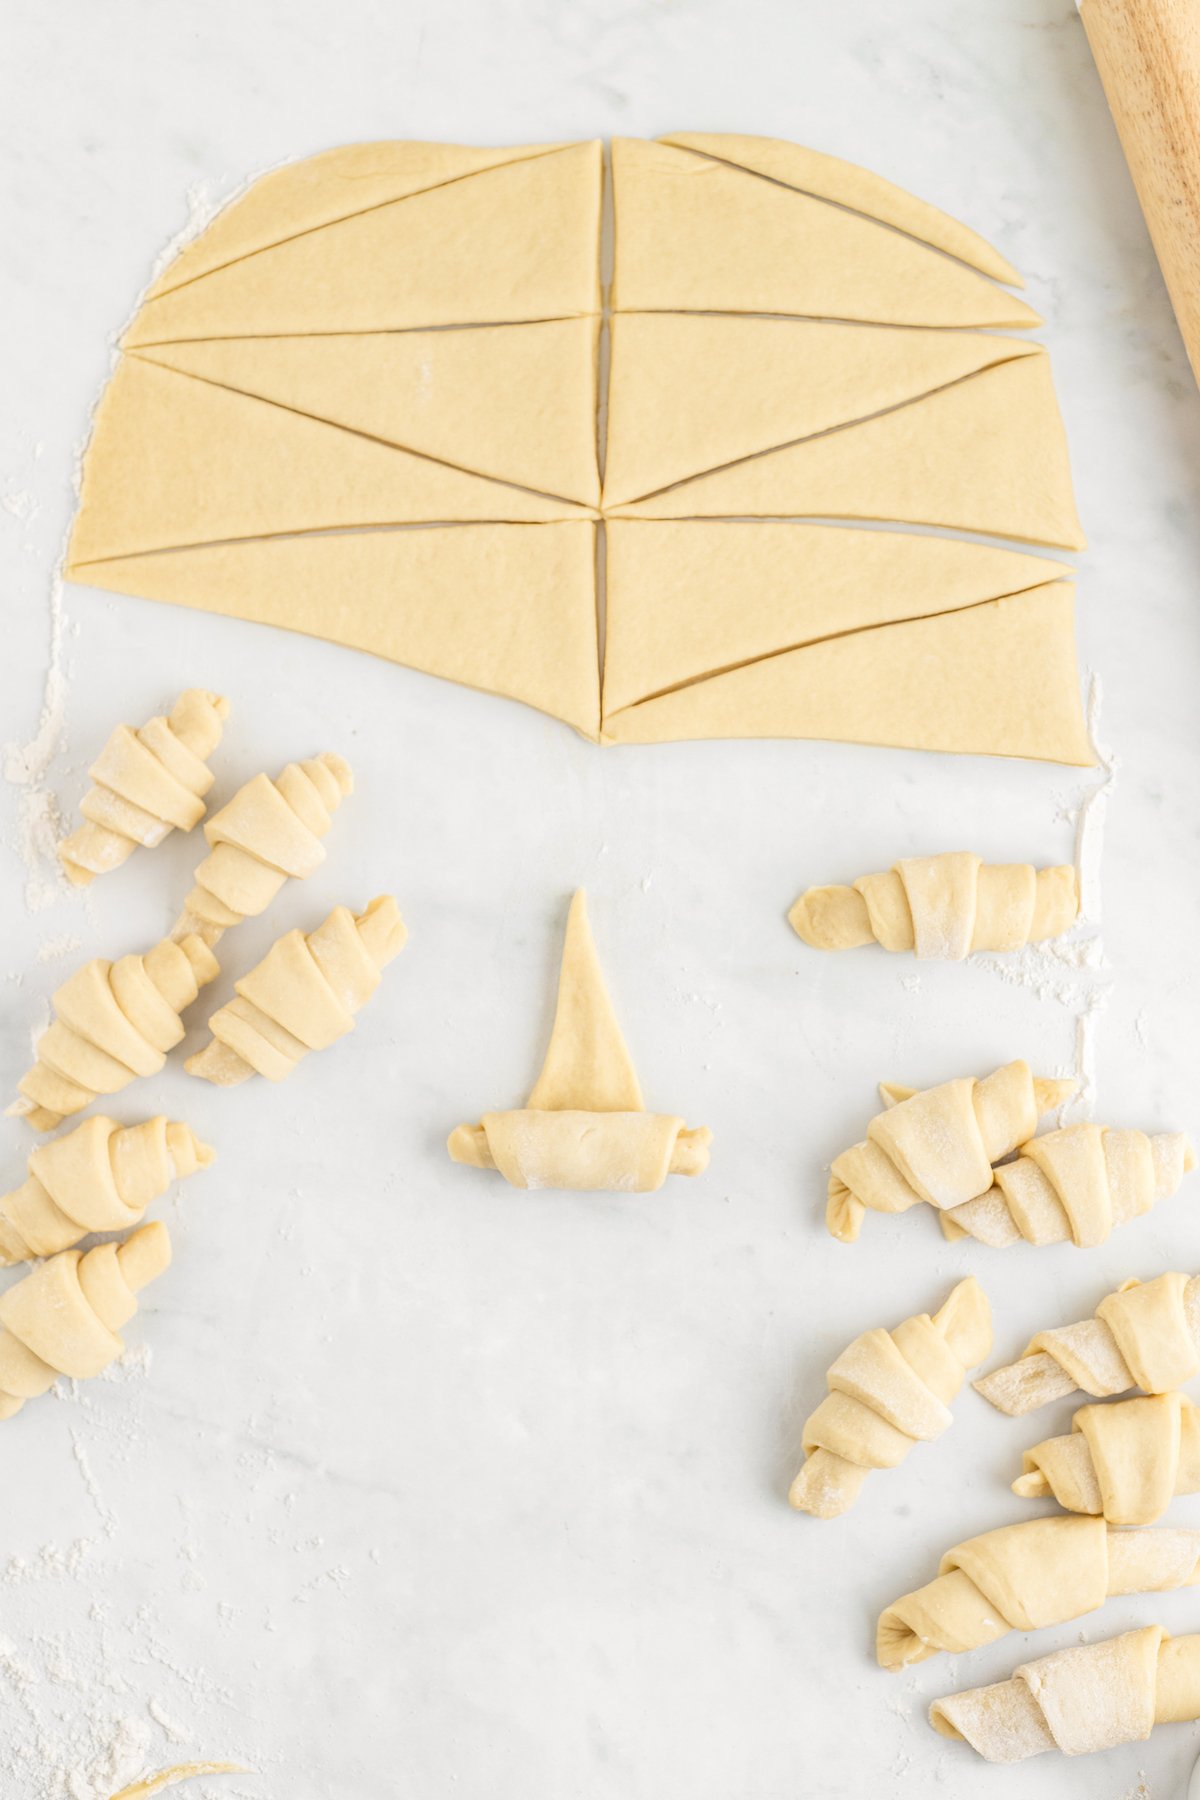 A half-rolled crescent made of dough. Other dough crescents and unrolled dough triangles are on the work surface as well.